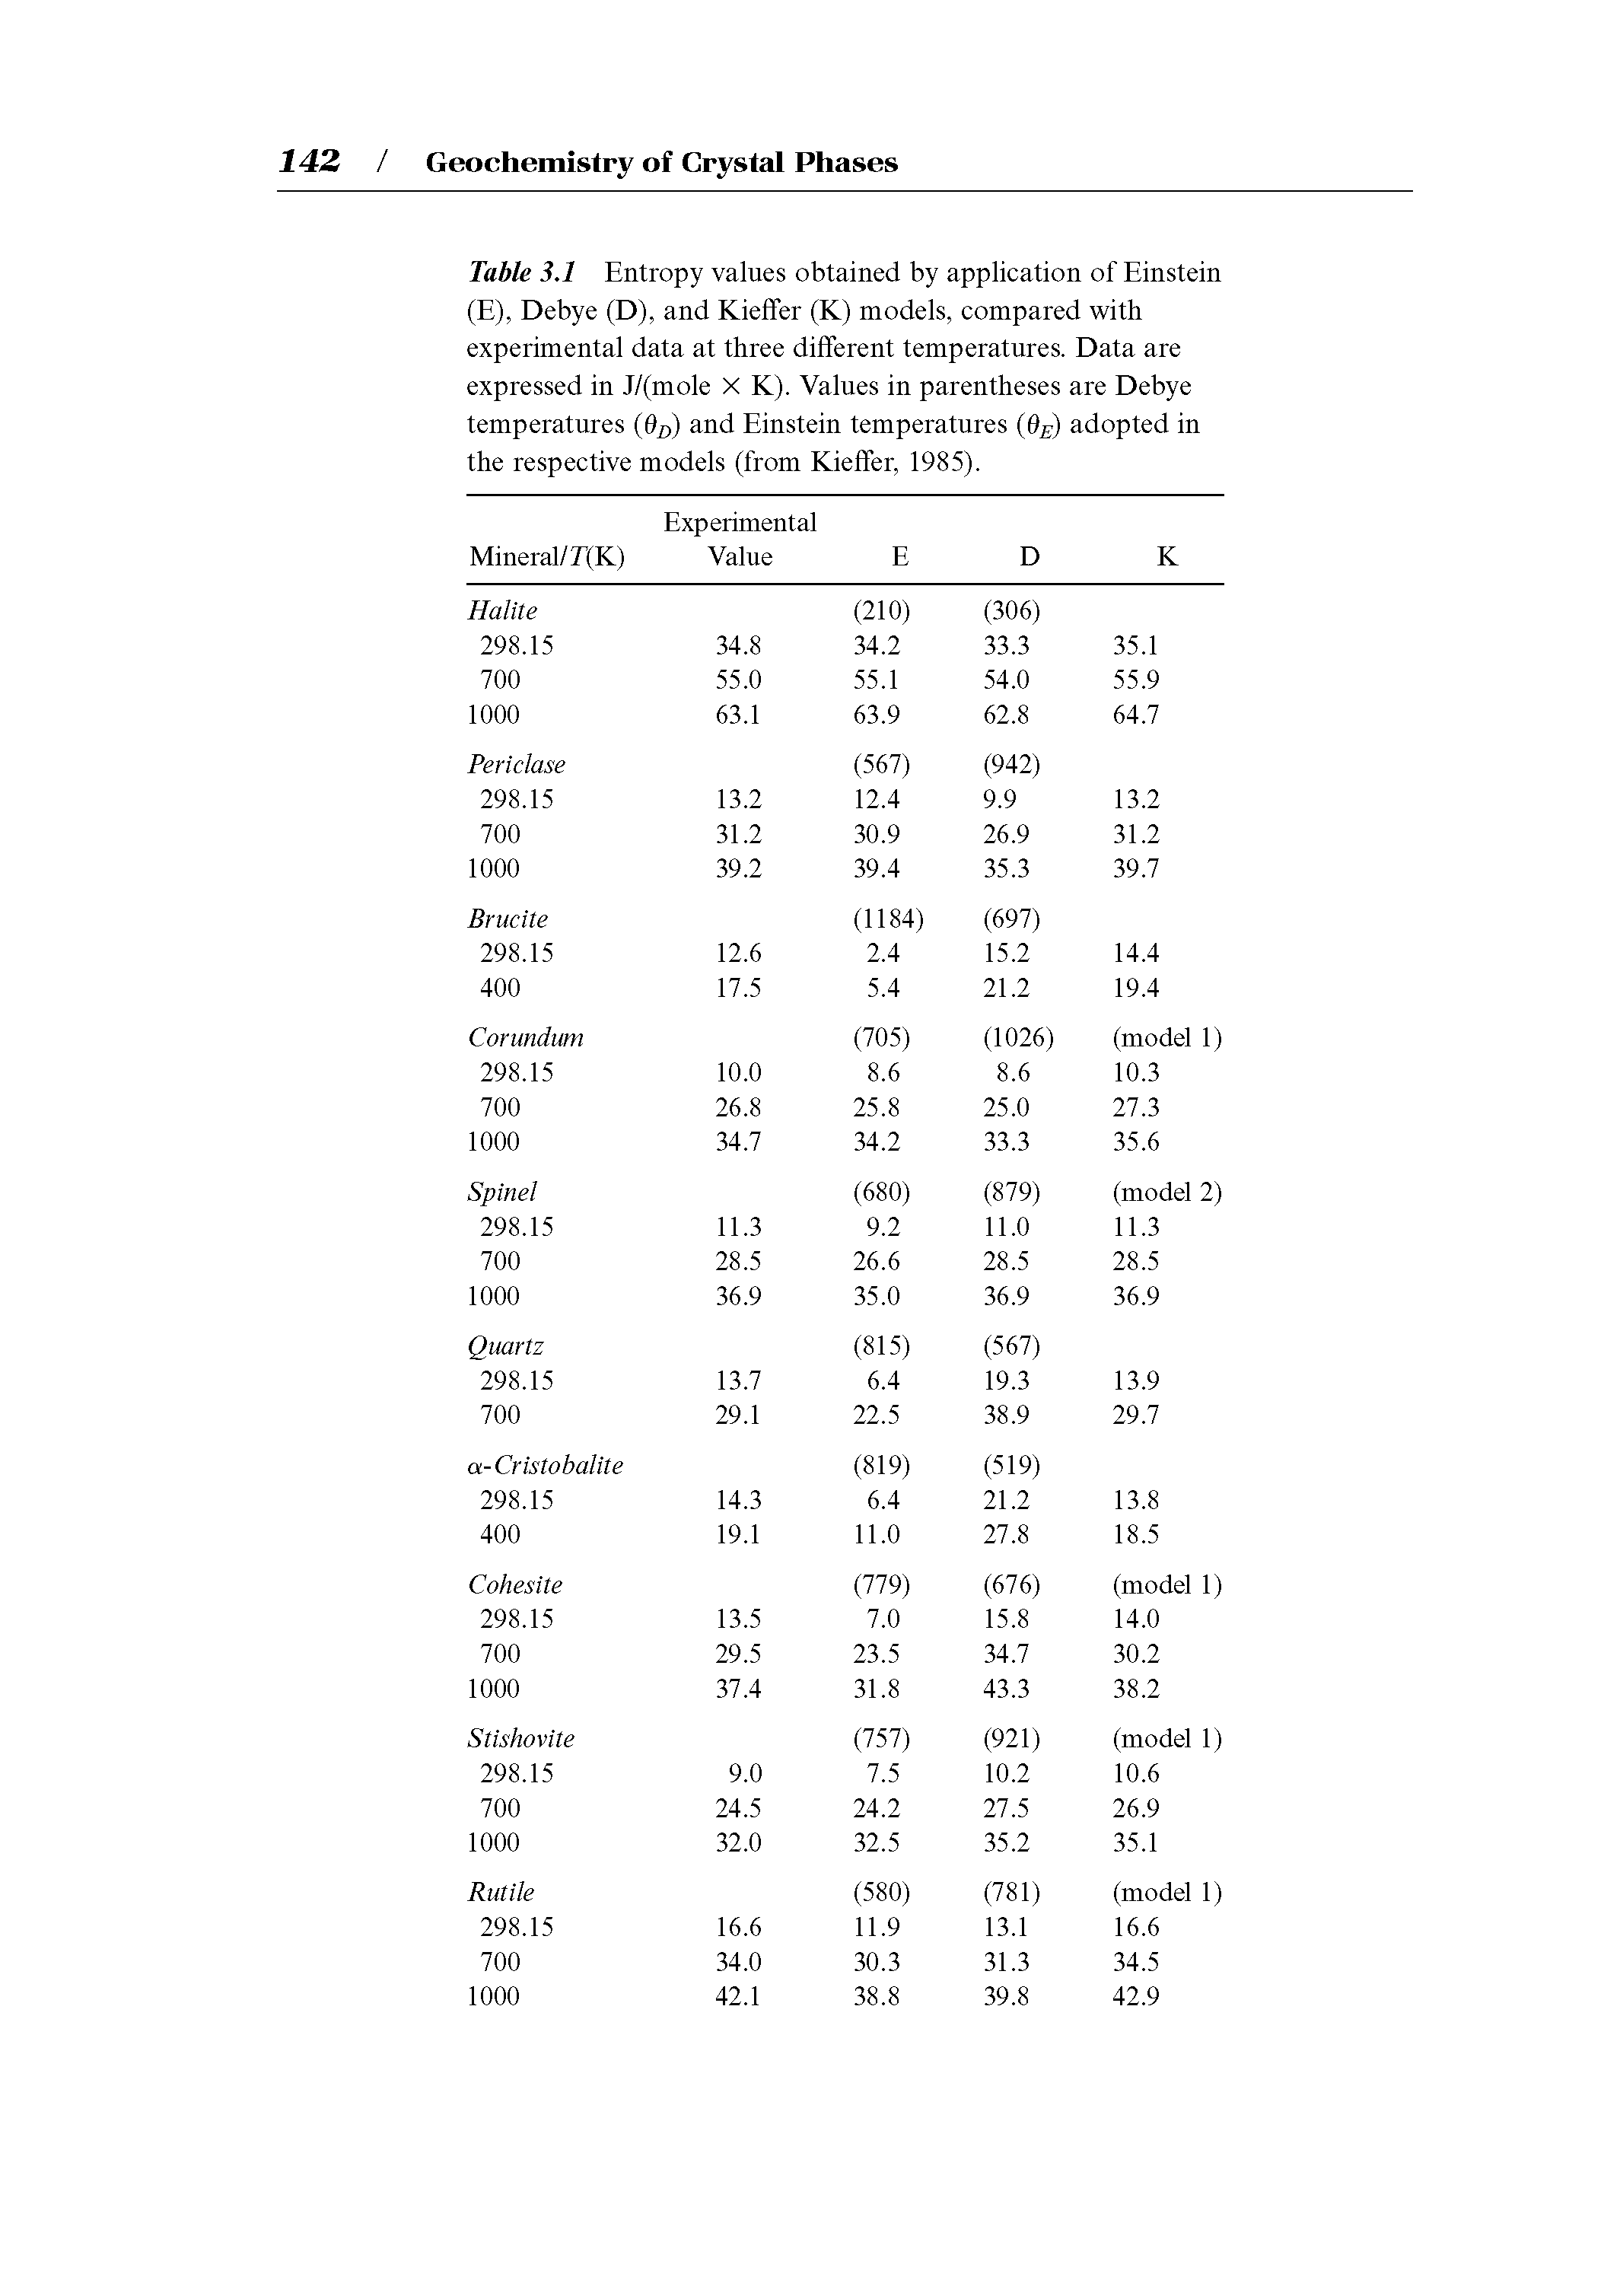 Table 3.1 Entropy values obtained by application of Einstein (E), Debye (D), and Kieifer (K) models, compared with experimental data at three diiferent temperatures. Data are expressed in J/(mole X K). Values in parentheses are Debye temperatures (d, ) and Einstein temperatures (9 ) adopted in the respective models (from Kieifer, 1985).